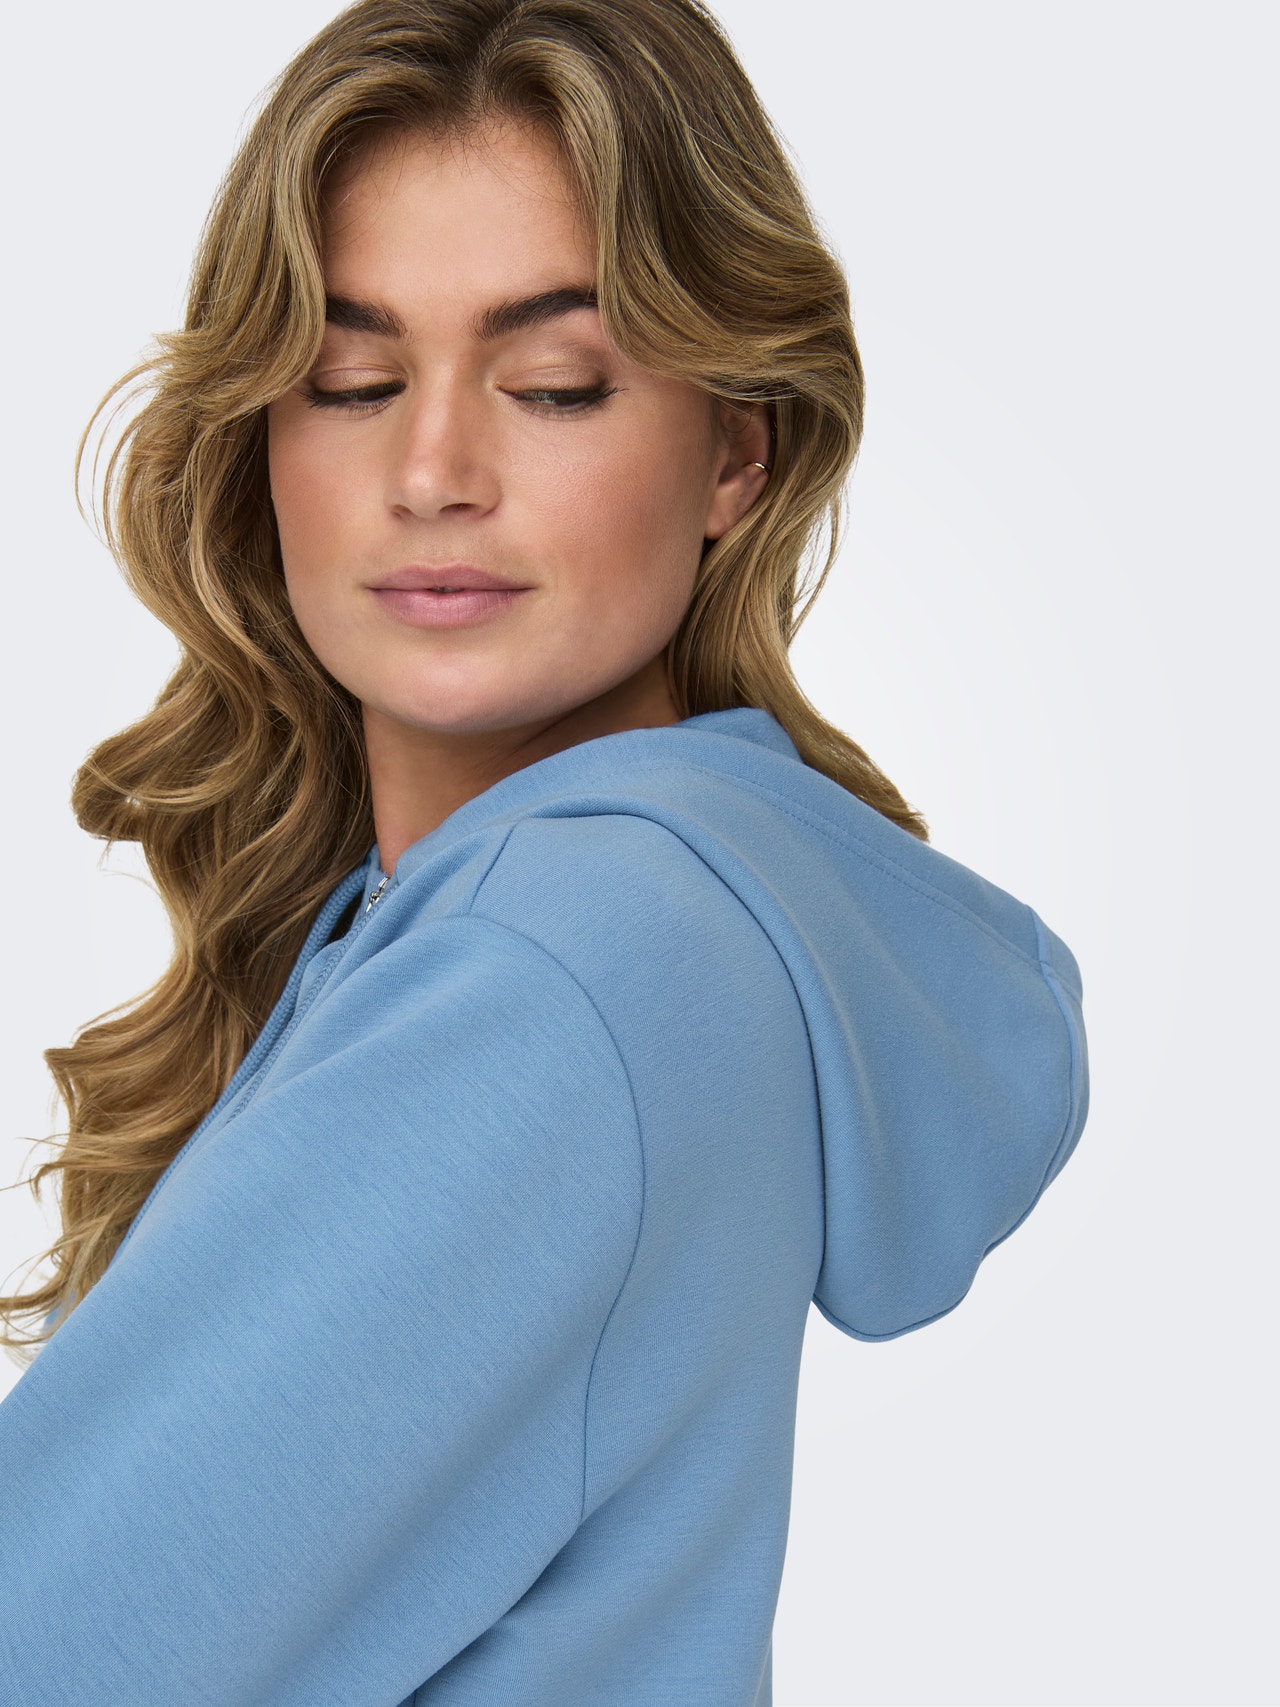 ONLY Sudaderas Corte loose Capucha -Blissful Blue - 15283439